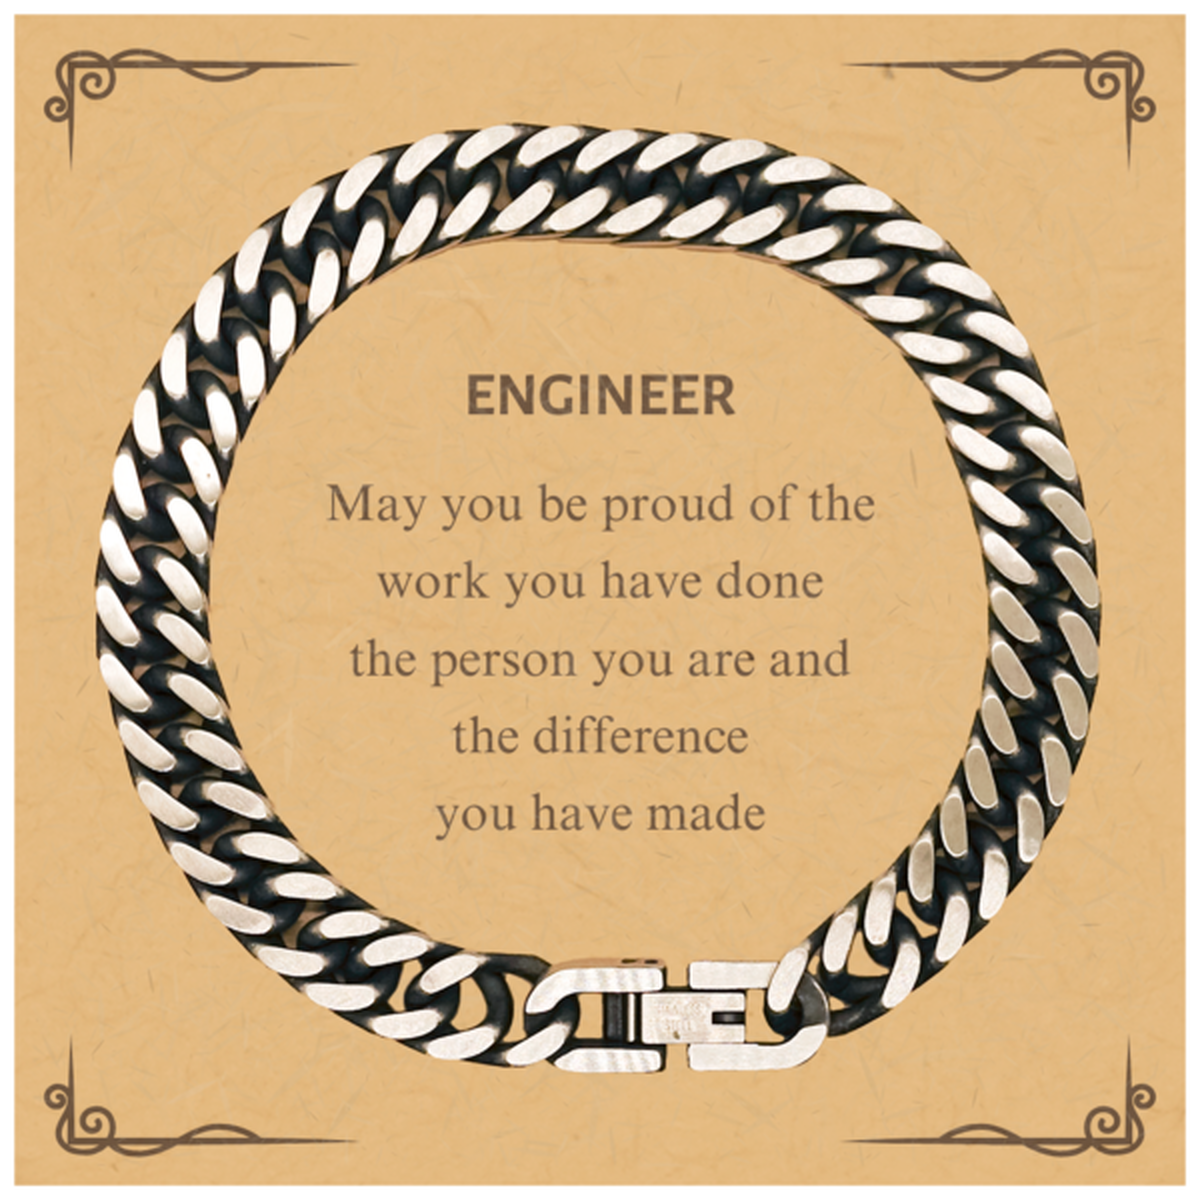 Engineer May you be proud of the work you have done, Retirement Engineer Cuban Link Chain Bracelet for Colleague Appreciation Gifts Amazing for Engineer